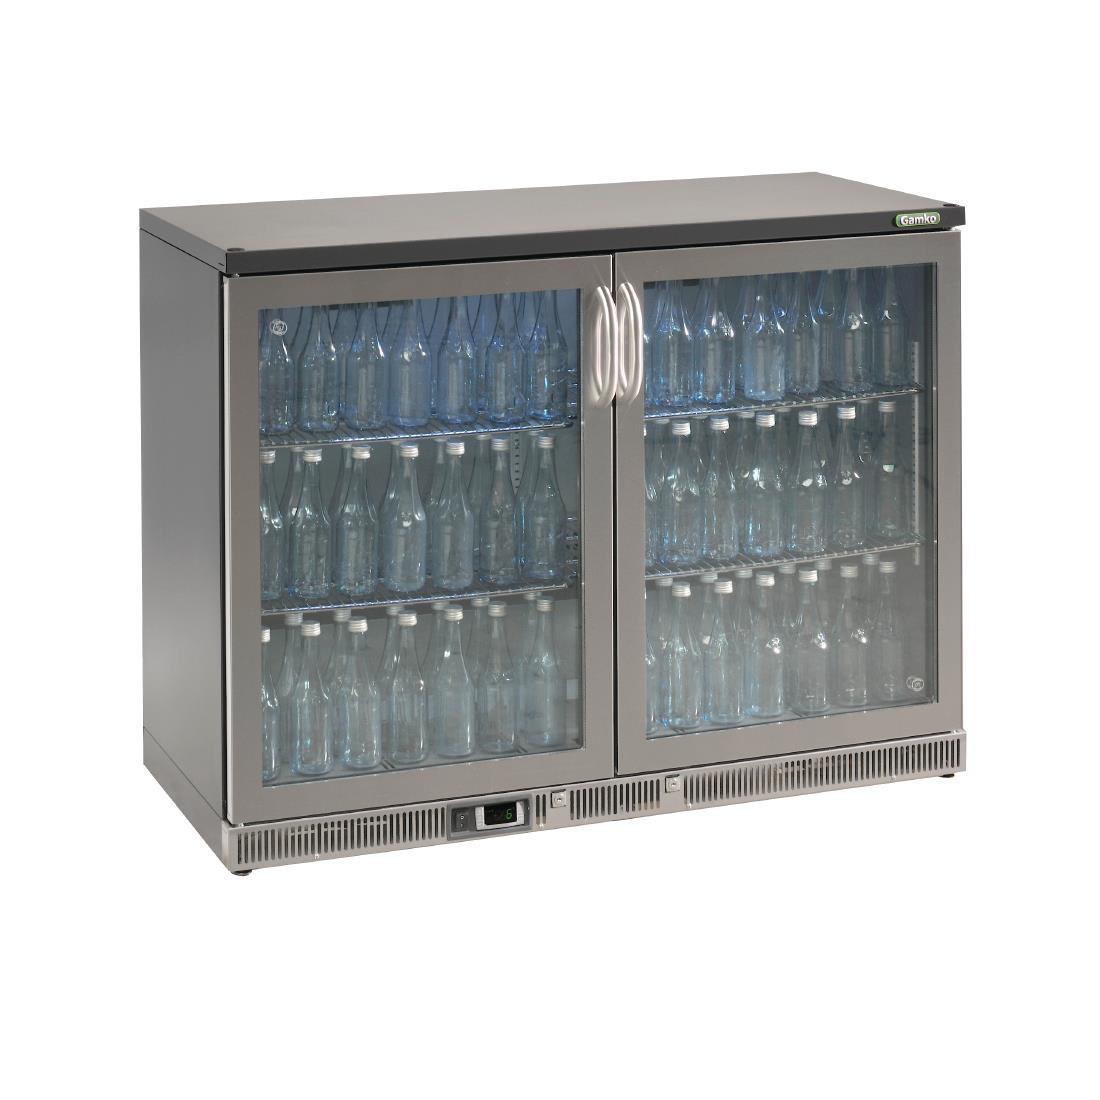 Gamko Bottle Cooler - Double Hinged Door 275 Ltr Stainless Steel - CE560  - 1